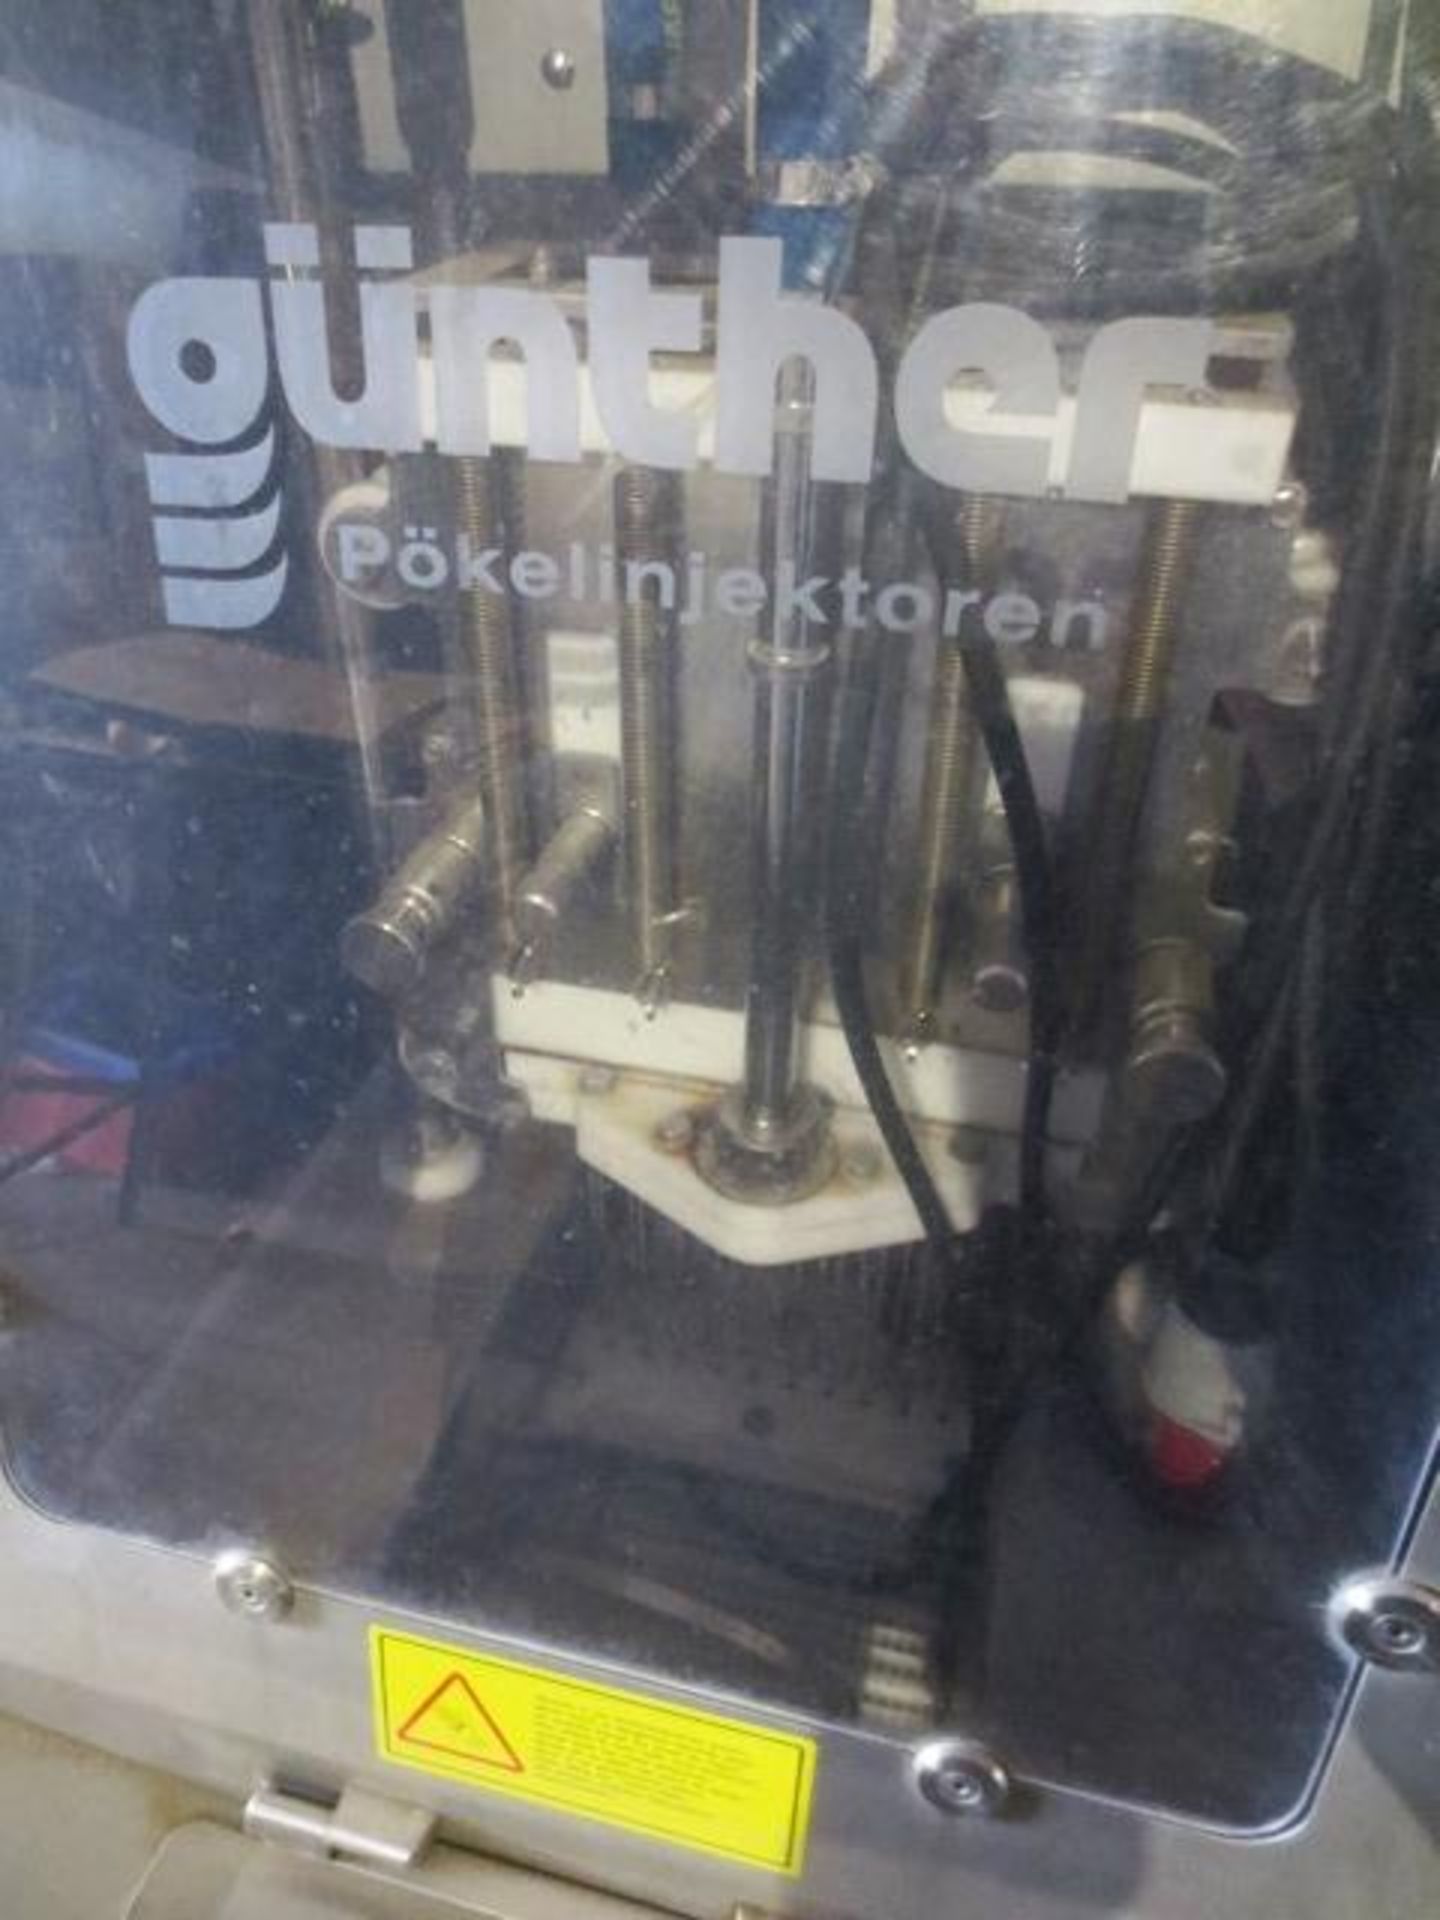 Gunther stainless steel meat injector, type INJEKTOR PI 21M, serial no: 34629 (2015), 3 phase - Image 2 of 5